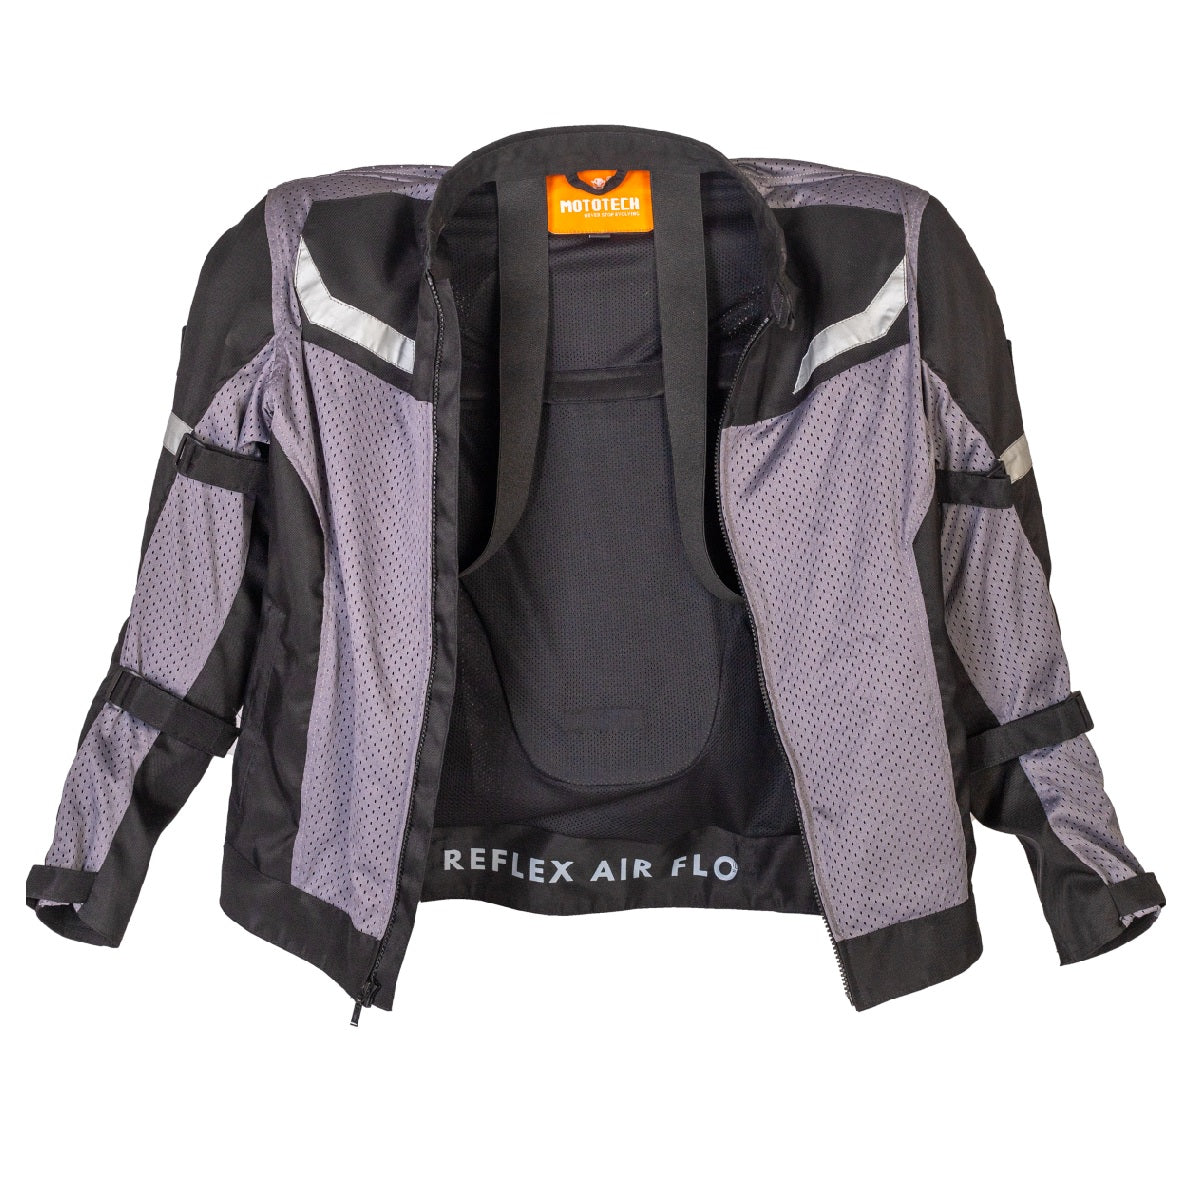 MOTOTECH, Buy BEST QUALITY Motorcycle / Riding Jackets